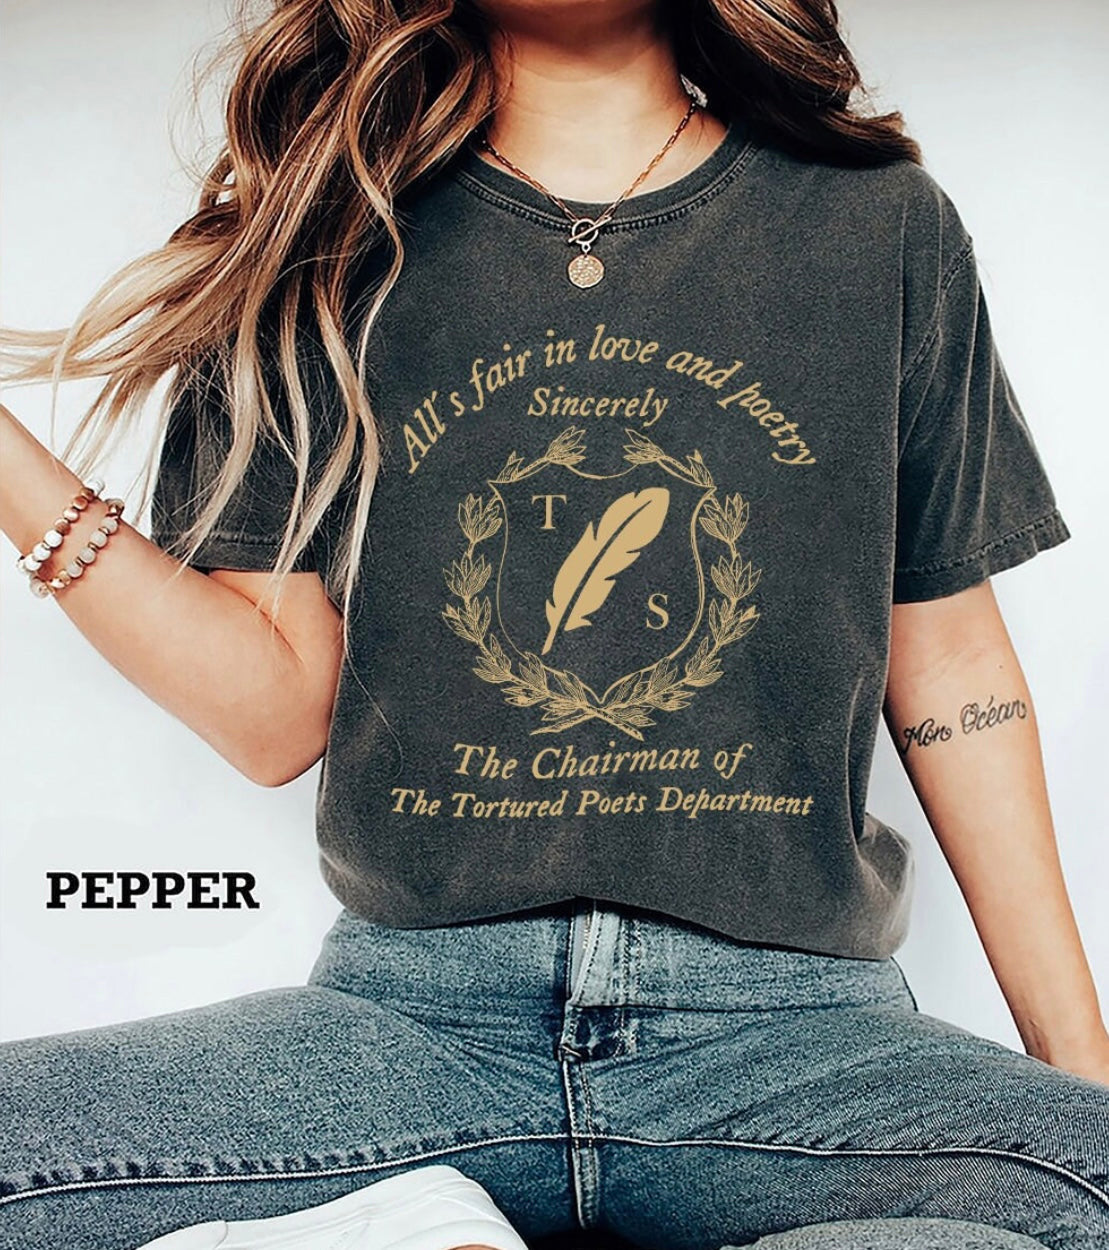 Love & Poetry Sincerely Pepper Tee